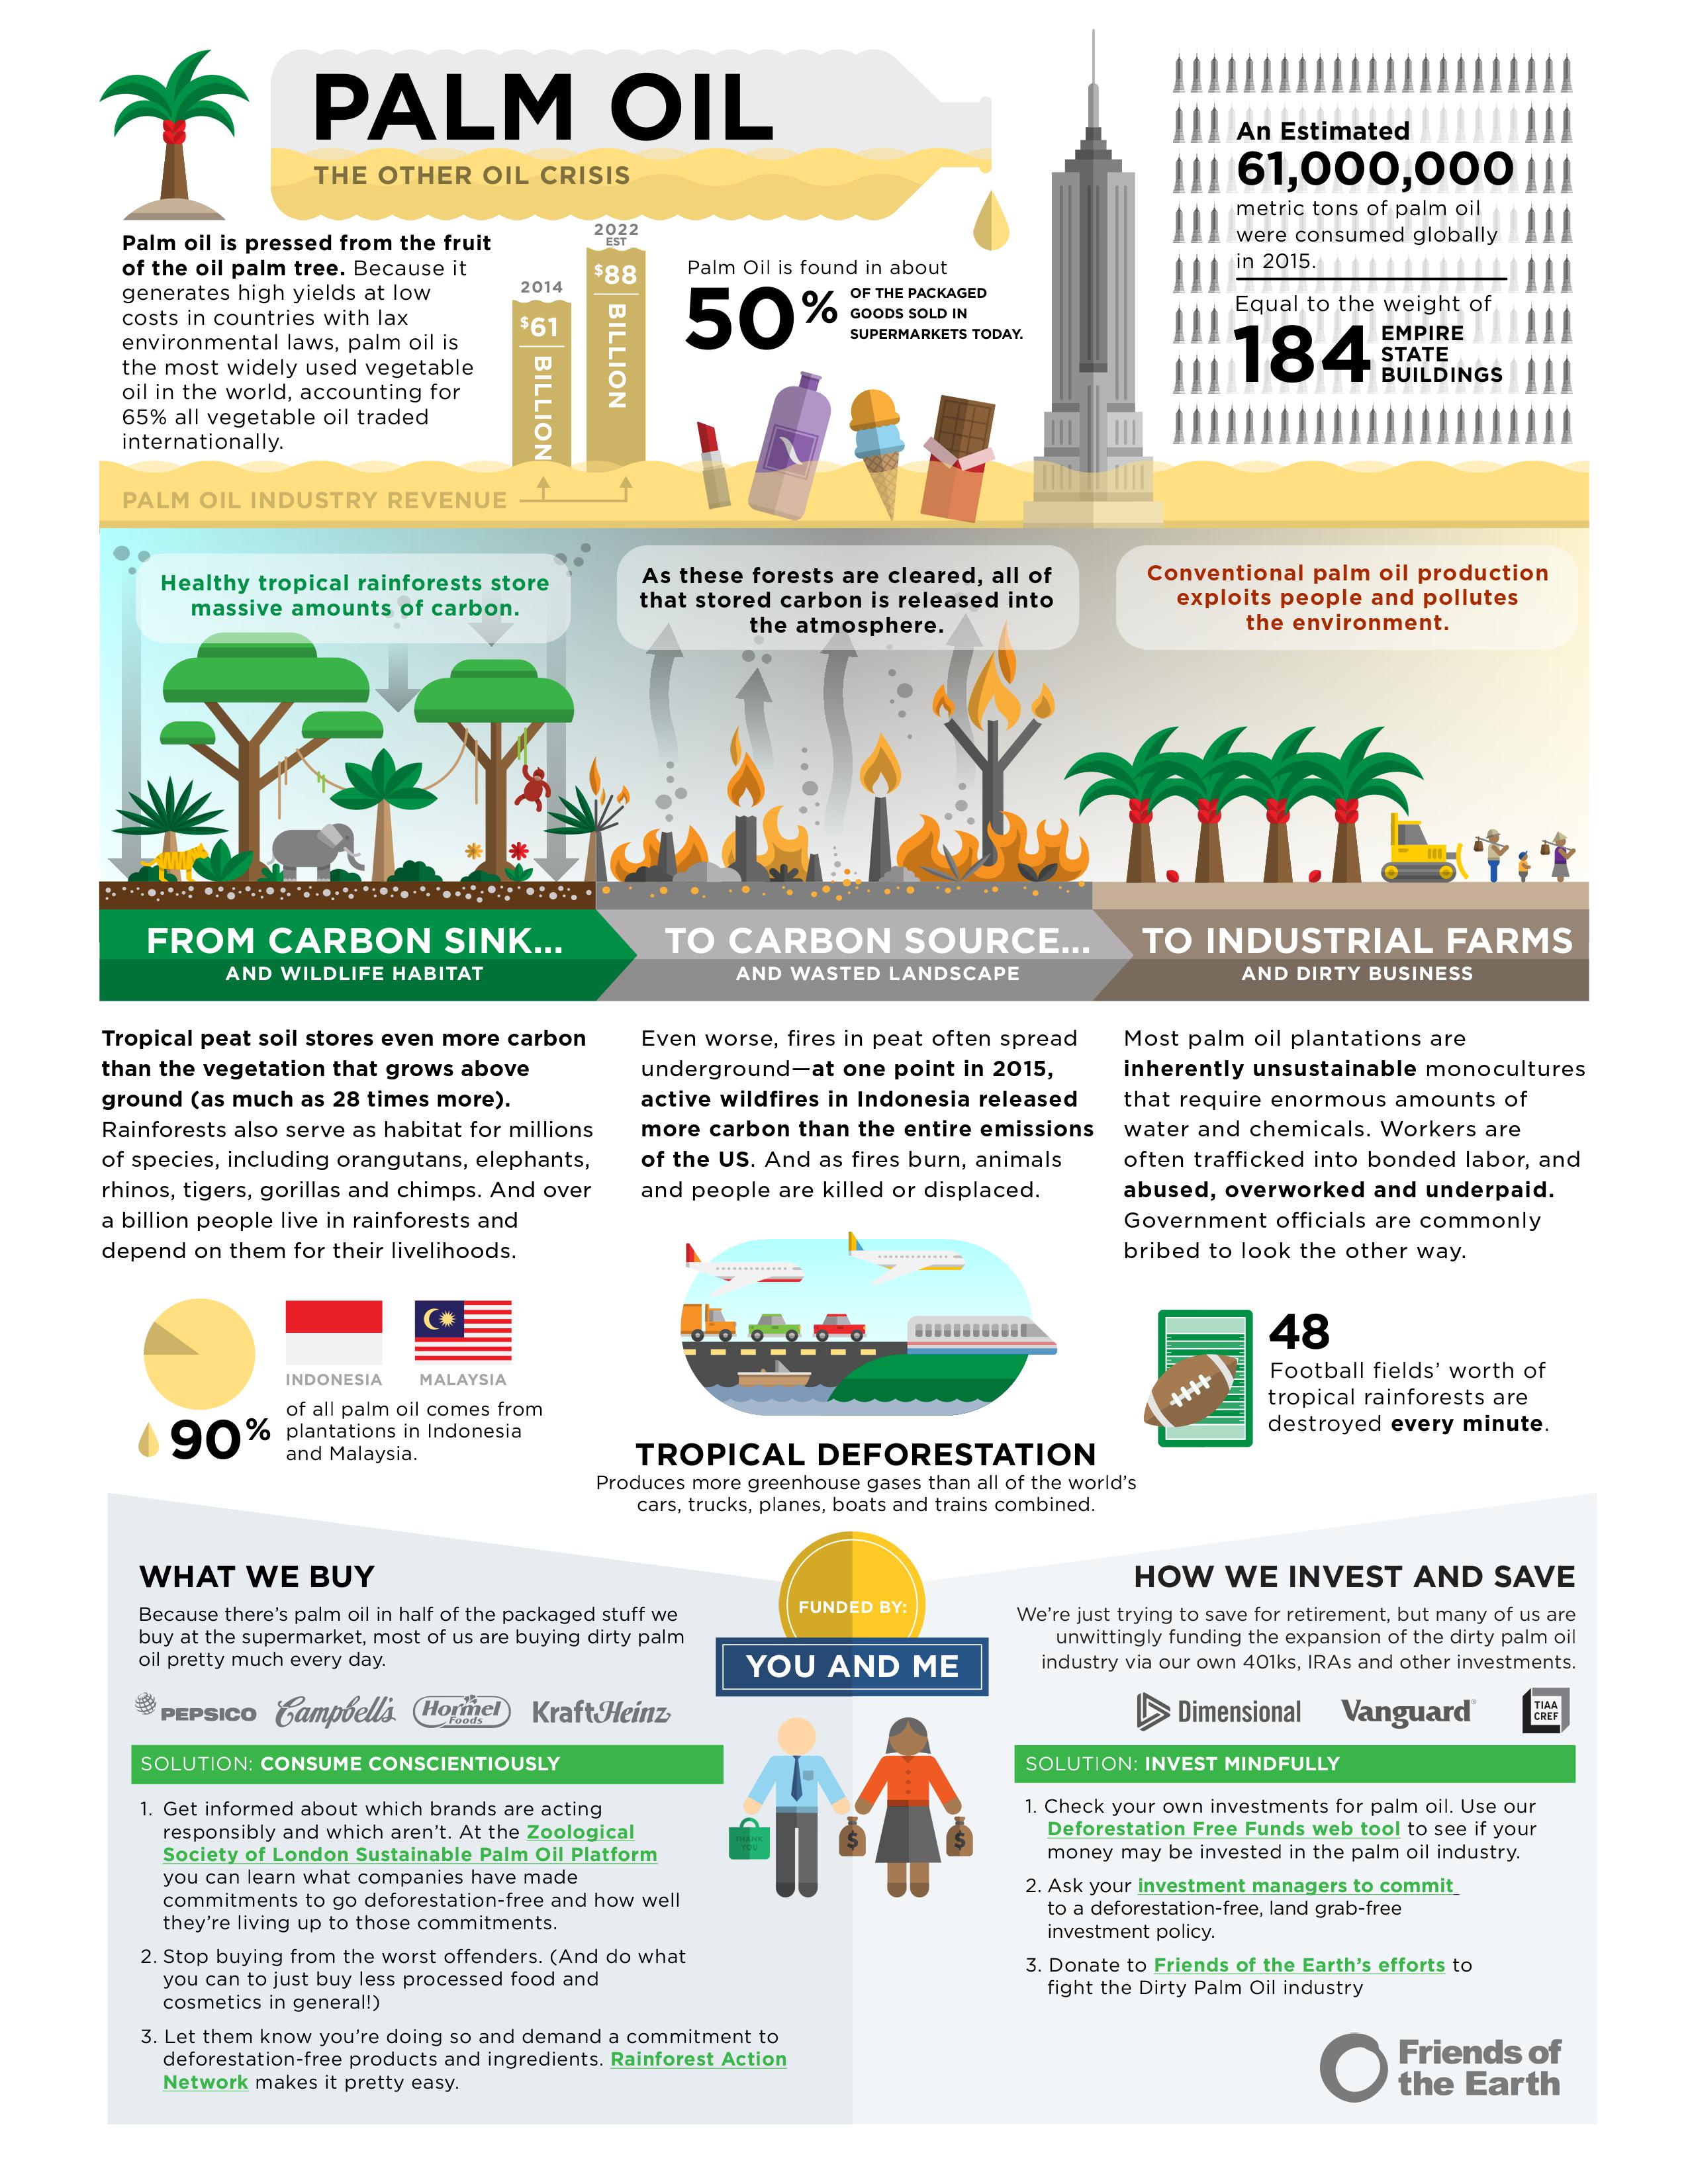 Dirty palm oil infographic